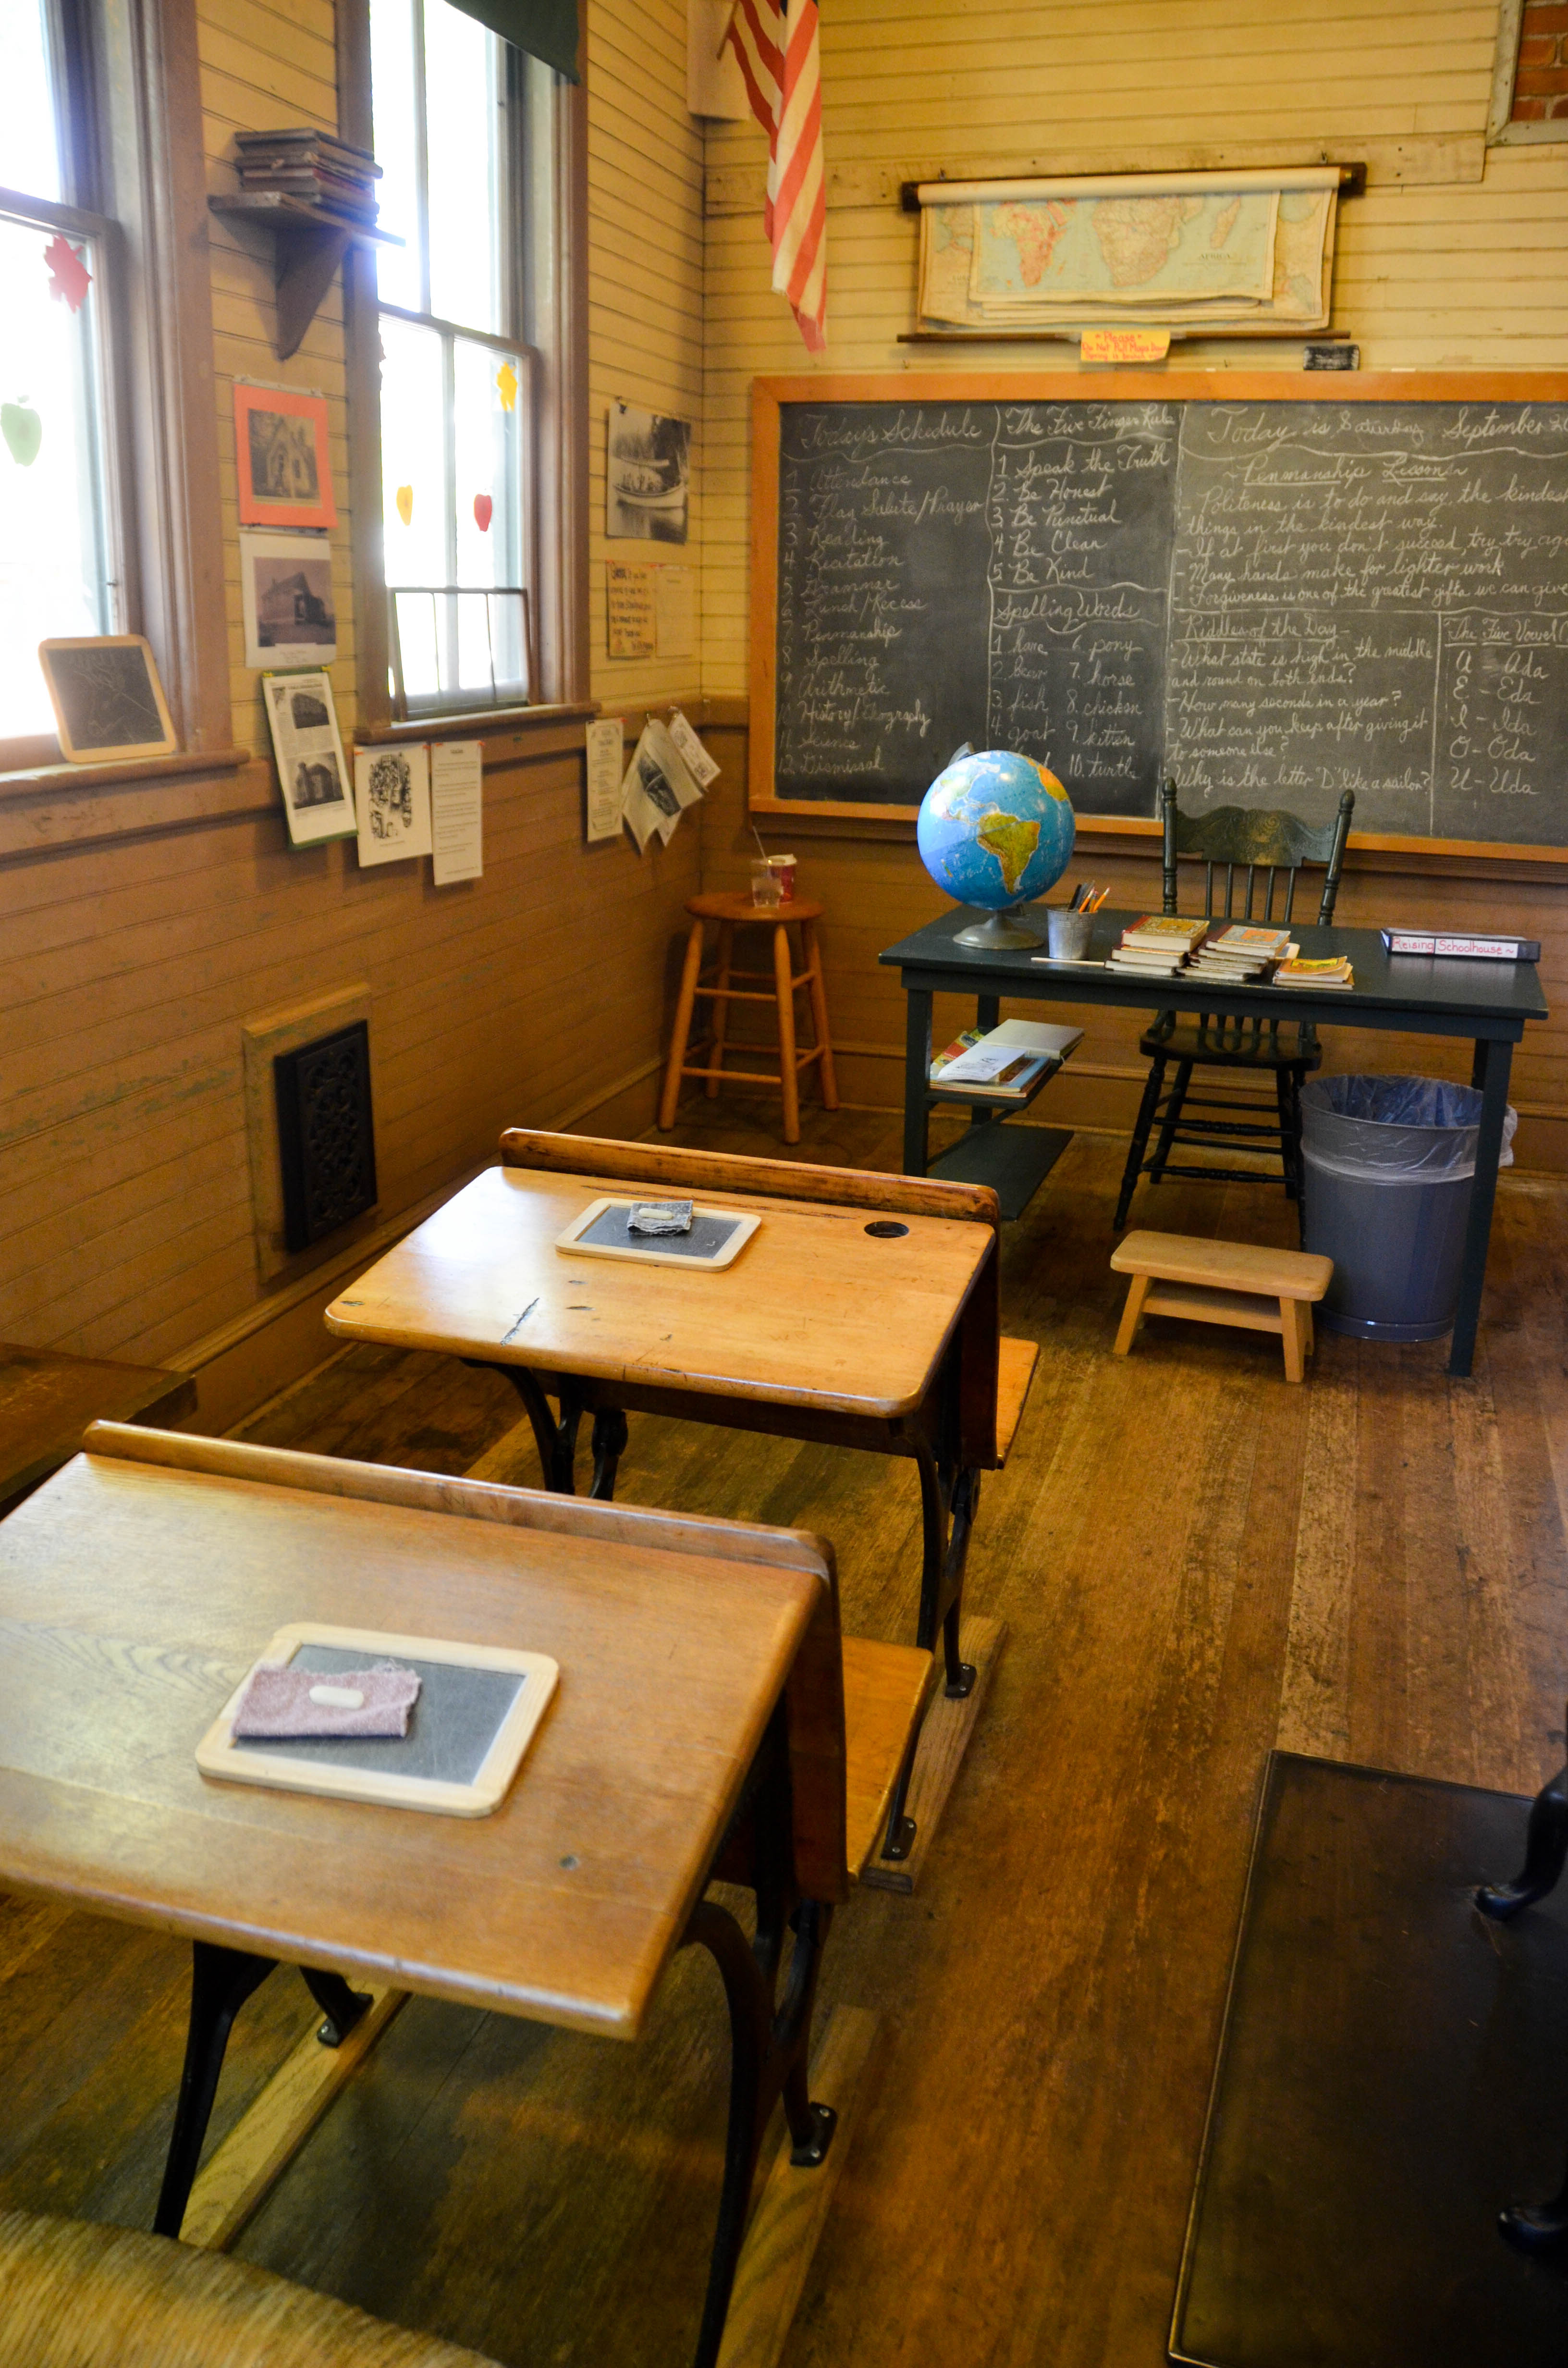 A one-room schoolhouse.